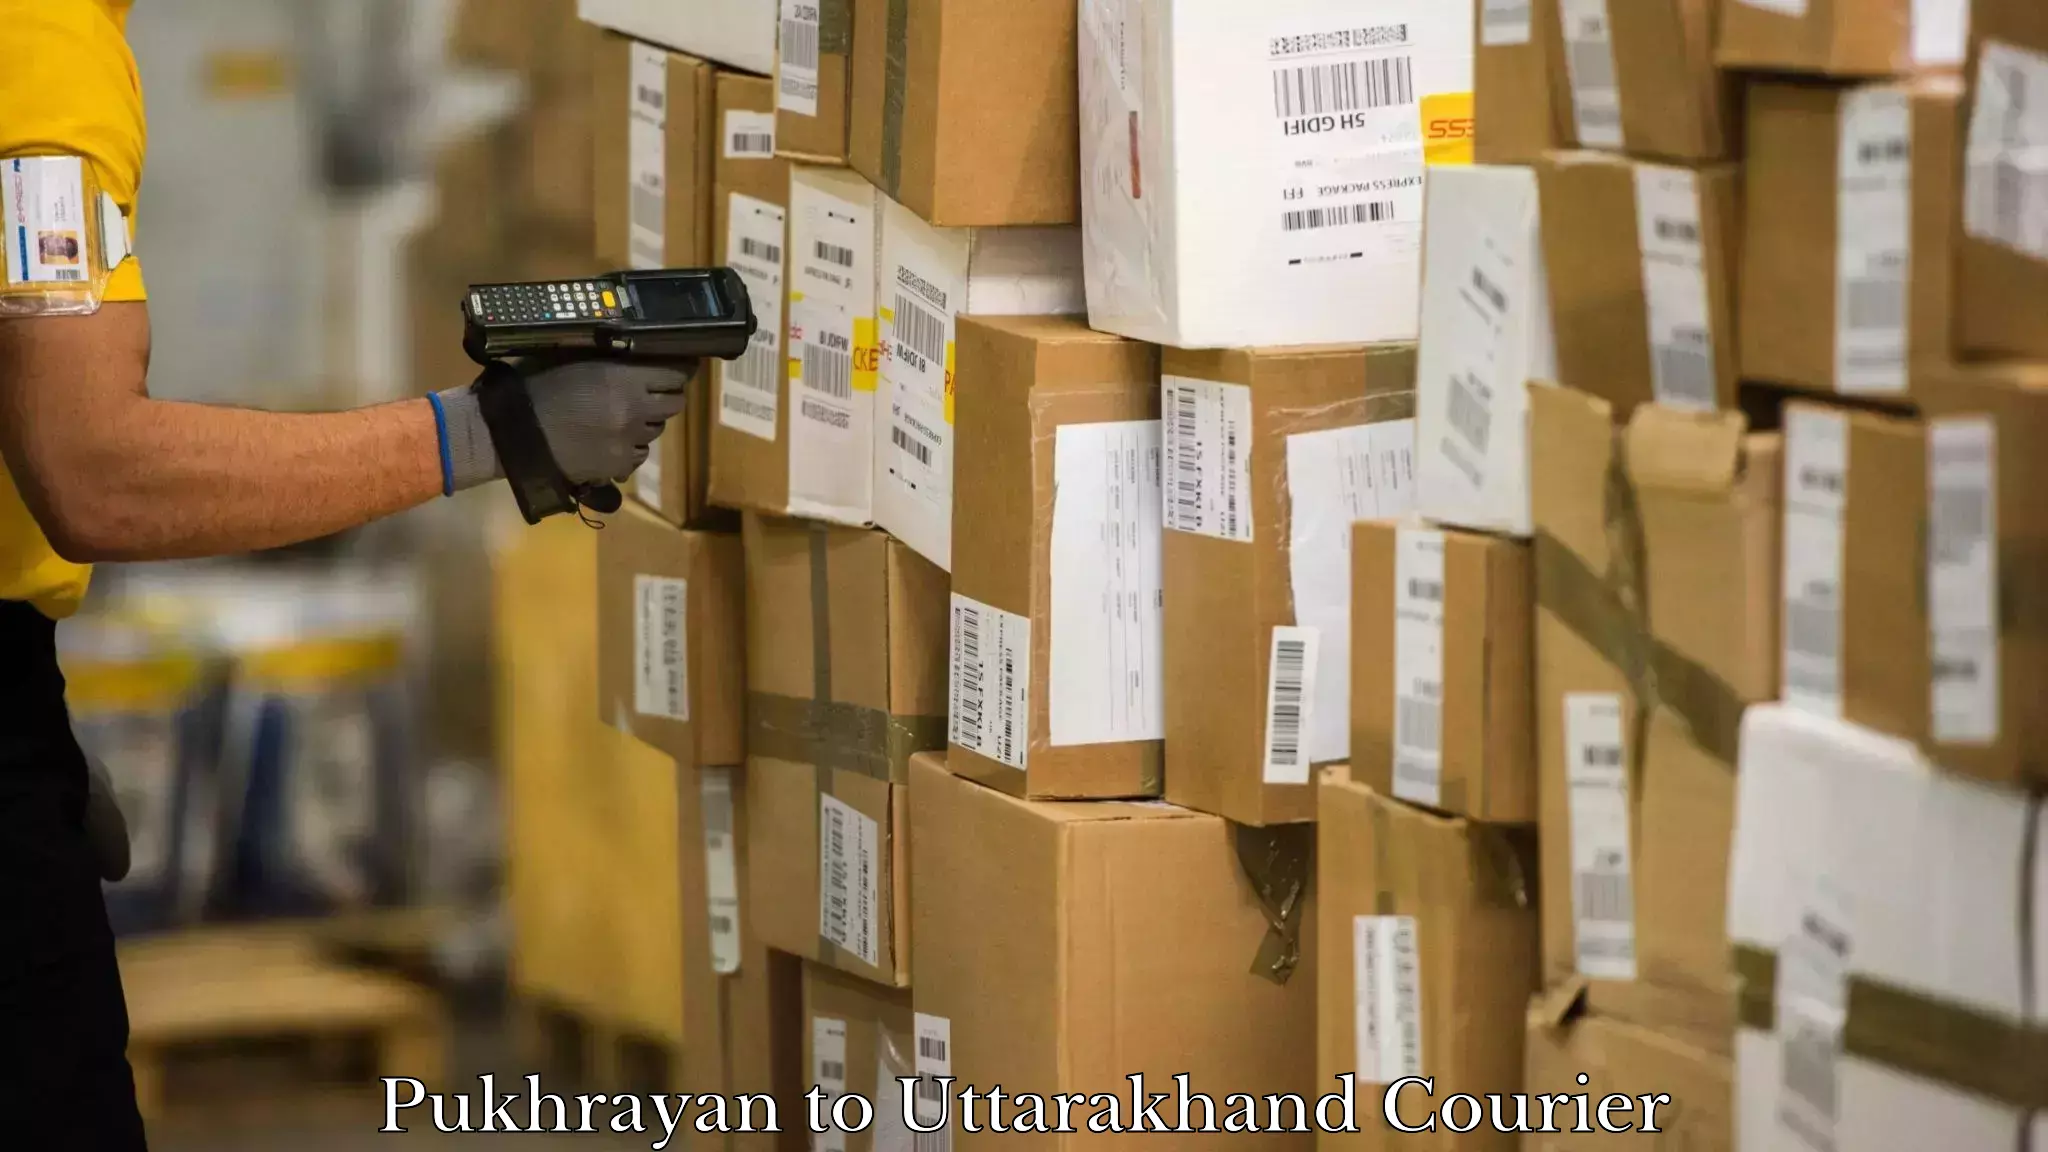 State-of-the-art courier technology in Pukhrayan to Uttarakhand